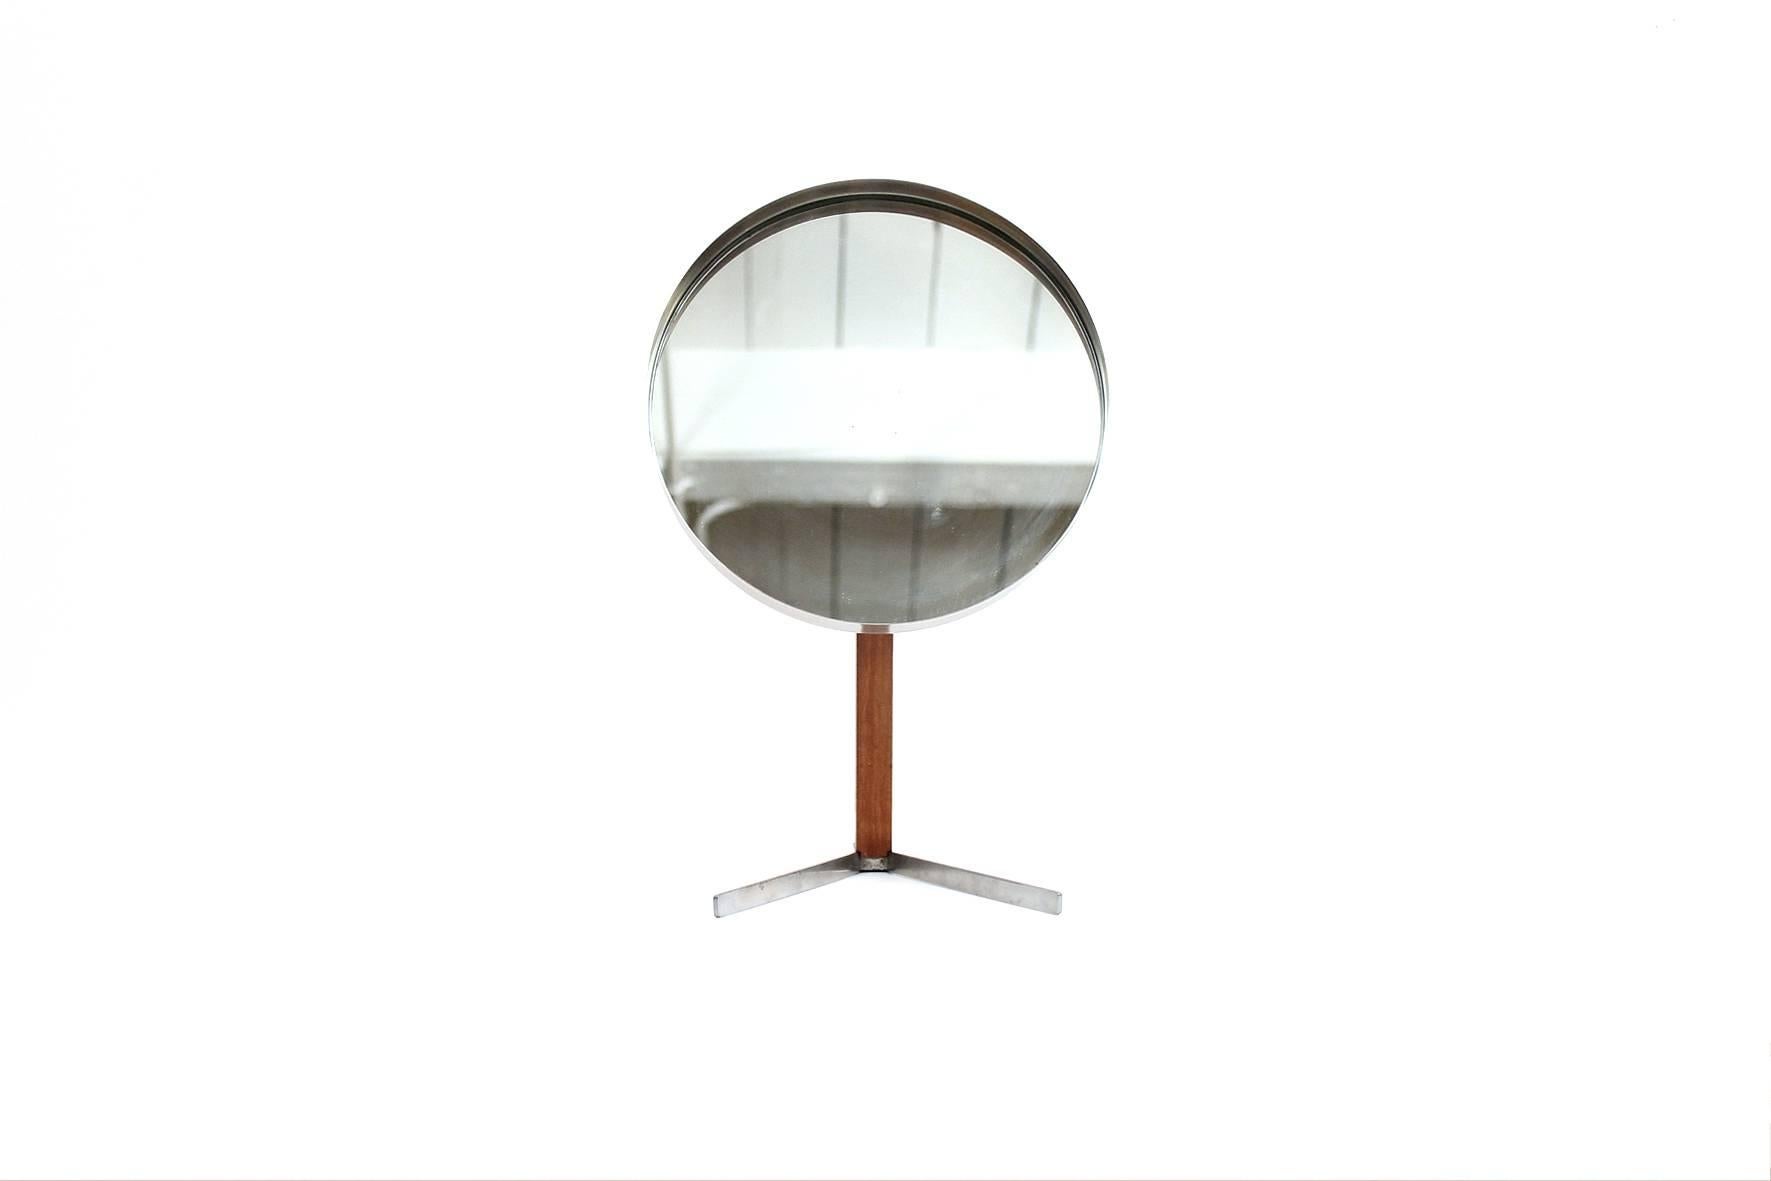 Superb table or vanity mirror in the style of the Swedish company Luxus. This particular example in teak and chromed steel. Produced by Durlston in the 1960s. Attractive cantilevered design and useful form.